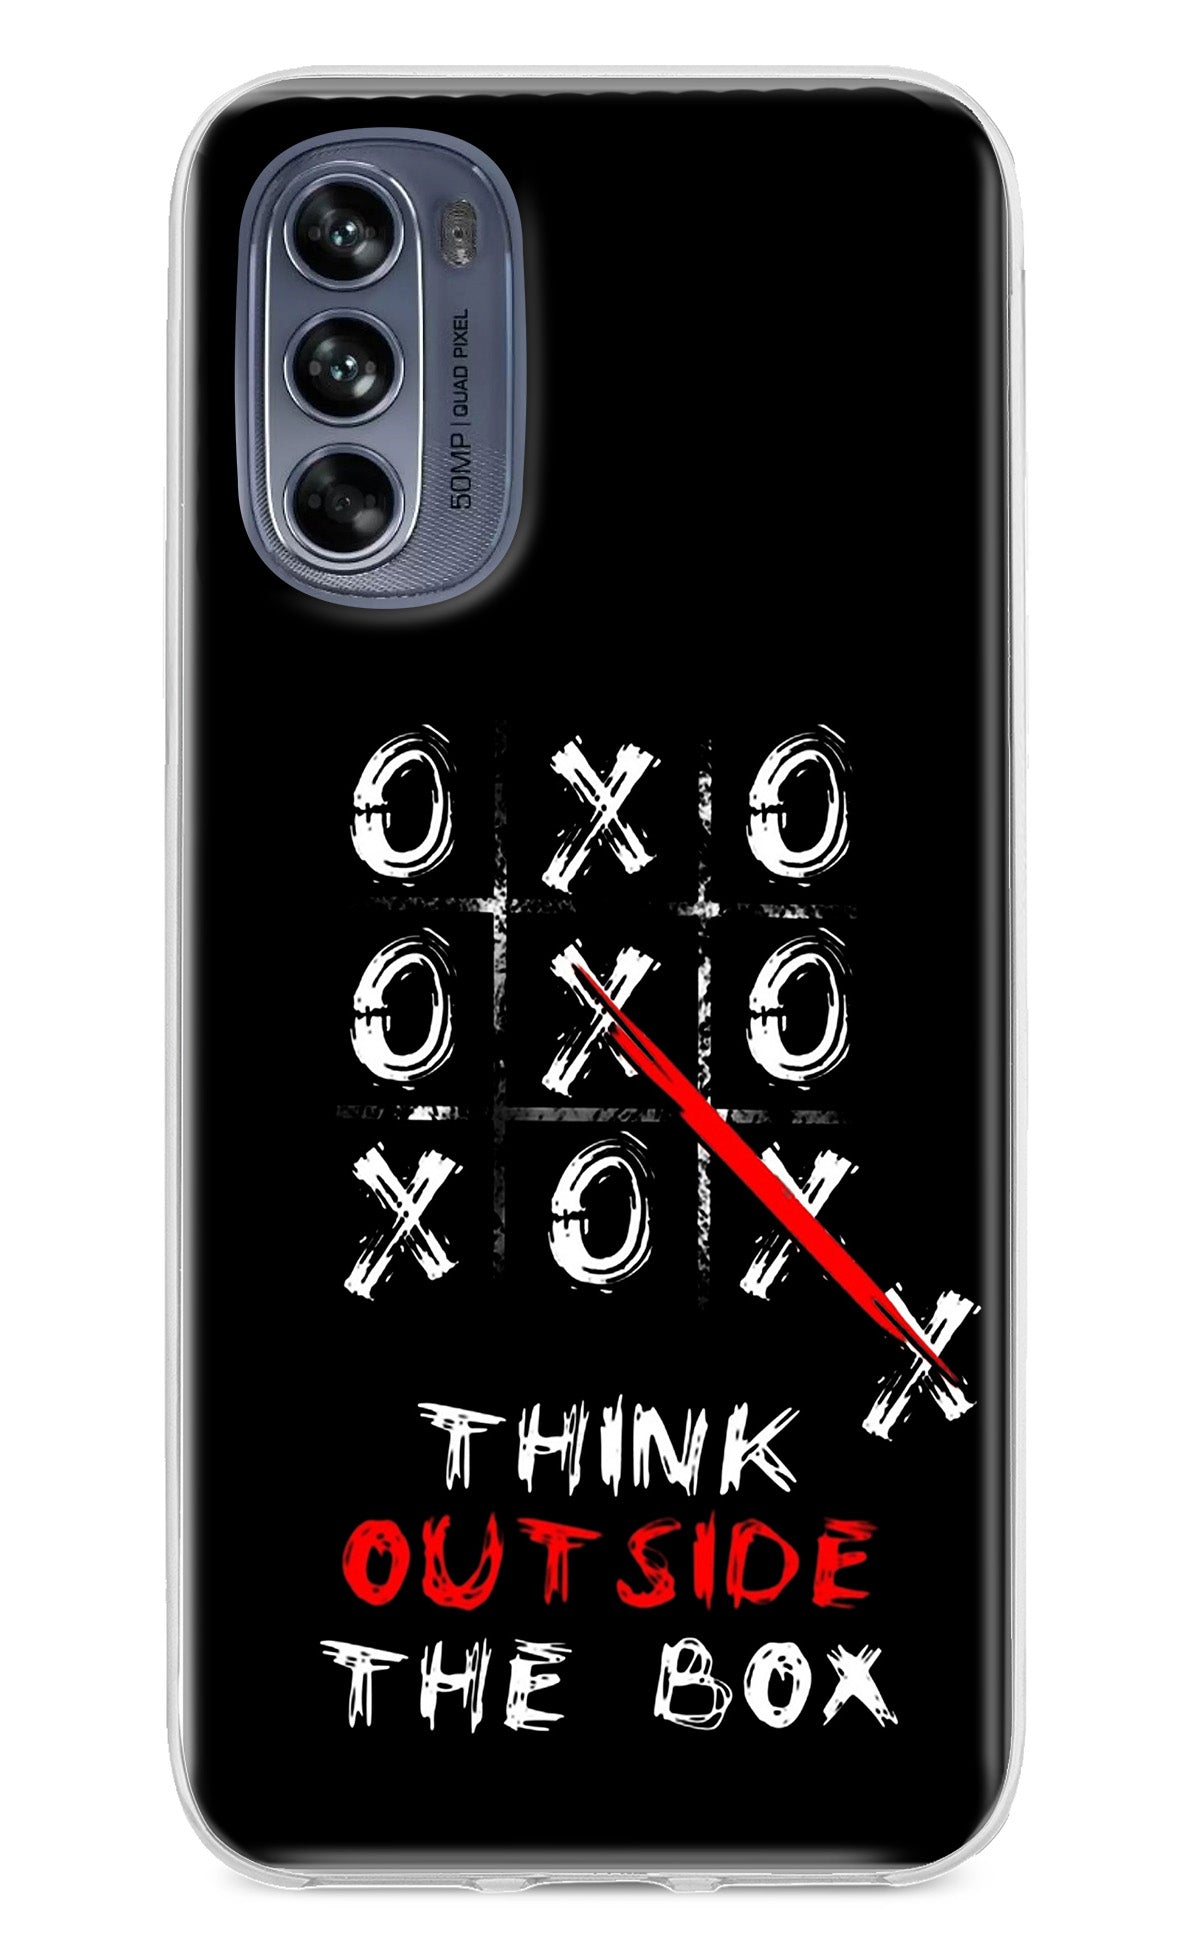 Think out of the BOX Moto G62 5G Back Cover